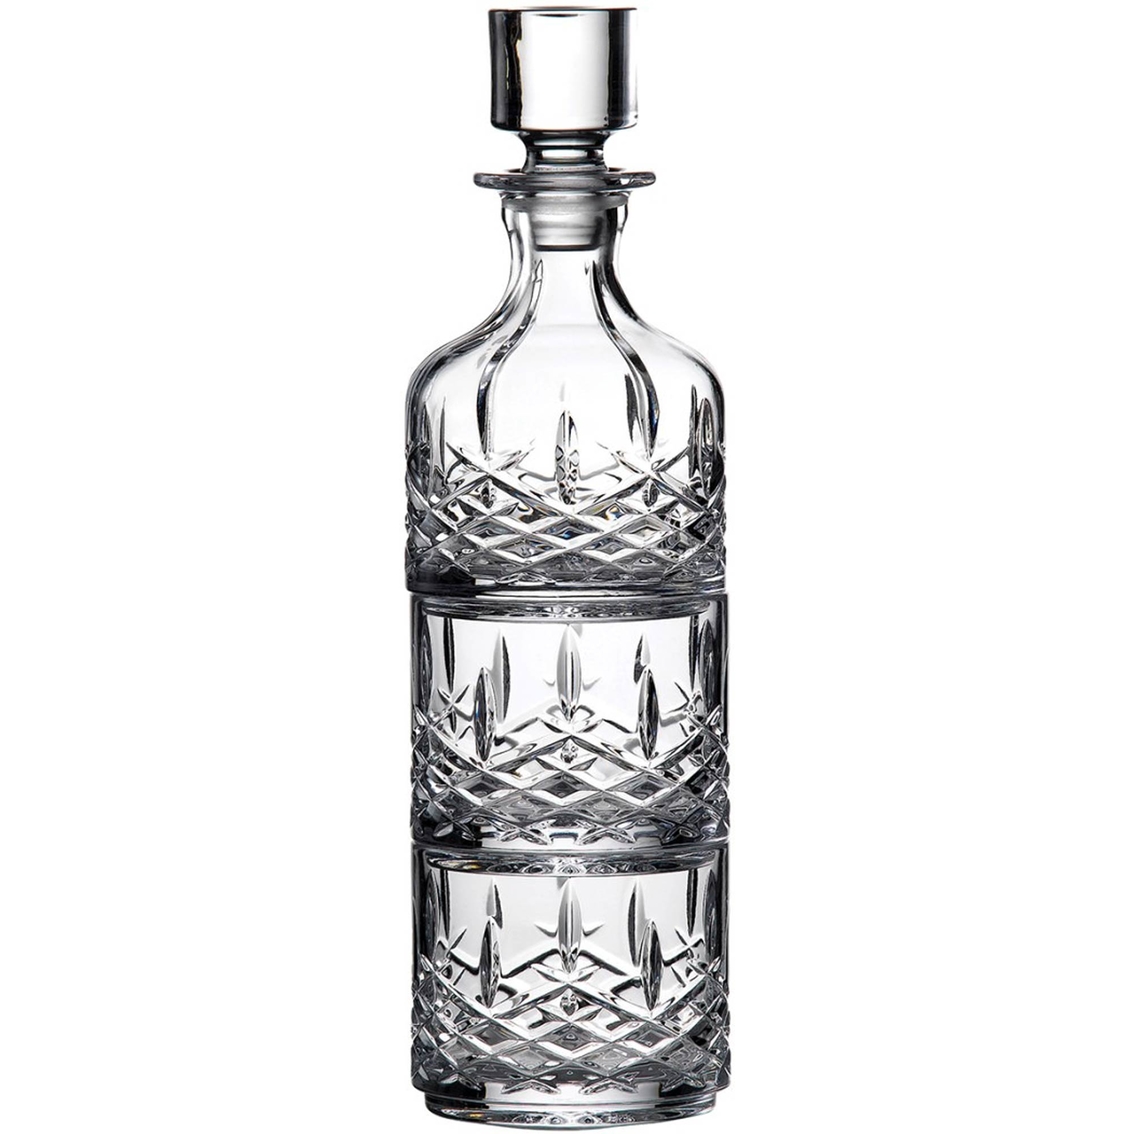 Marquis by Waterford Markham Stacking Decanter and Tumbler 3 pc. Set - Image 2 of 2